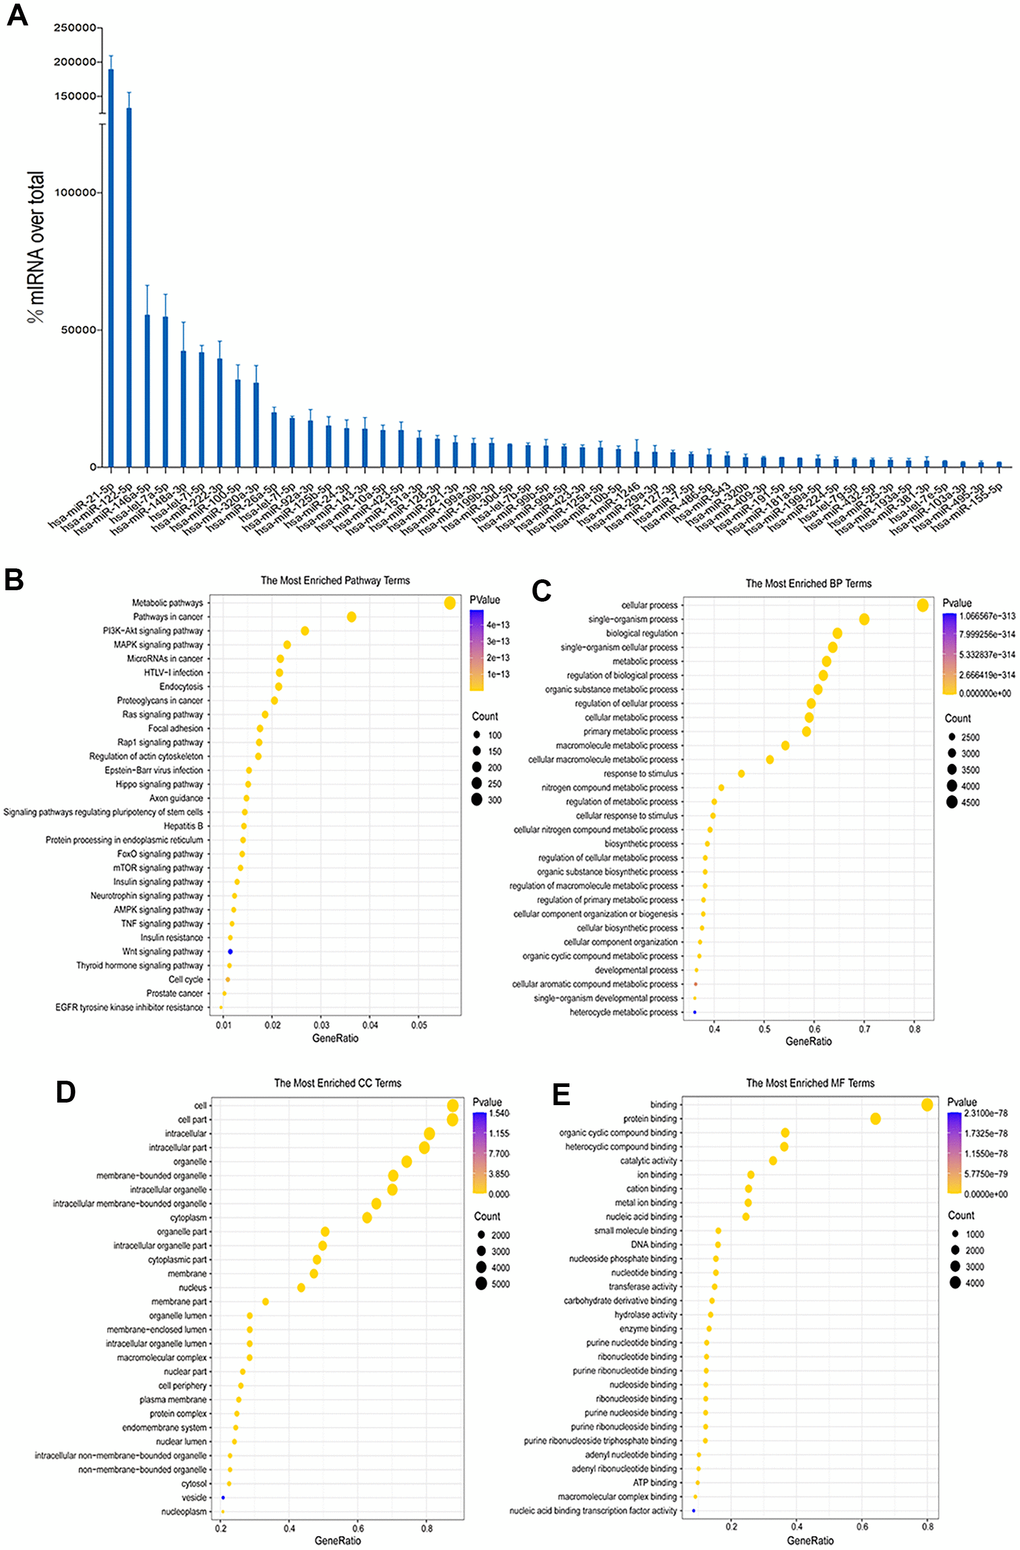 Sequencing and bioinformatics analysis of miRNAs in hUC-MSCs-Exos. (A) Top 50 highly expressed hUC-MSCs-Exos miRNAs. (B–E) KEGG and GO (GO molecular function, GO biological process and GO cellular component) analysis of genes regulated by the top 50 highly expressed miRNAs of hUC-MSCs-Exos. The color of bars indicates p values, and p